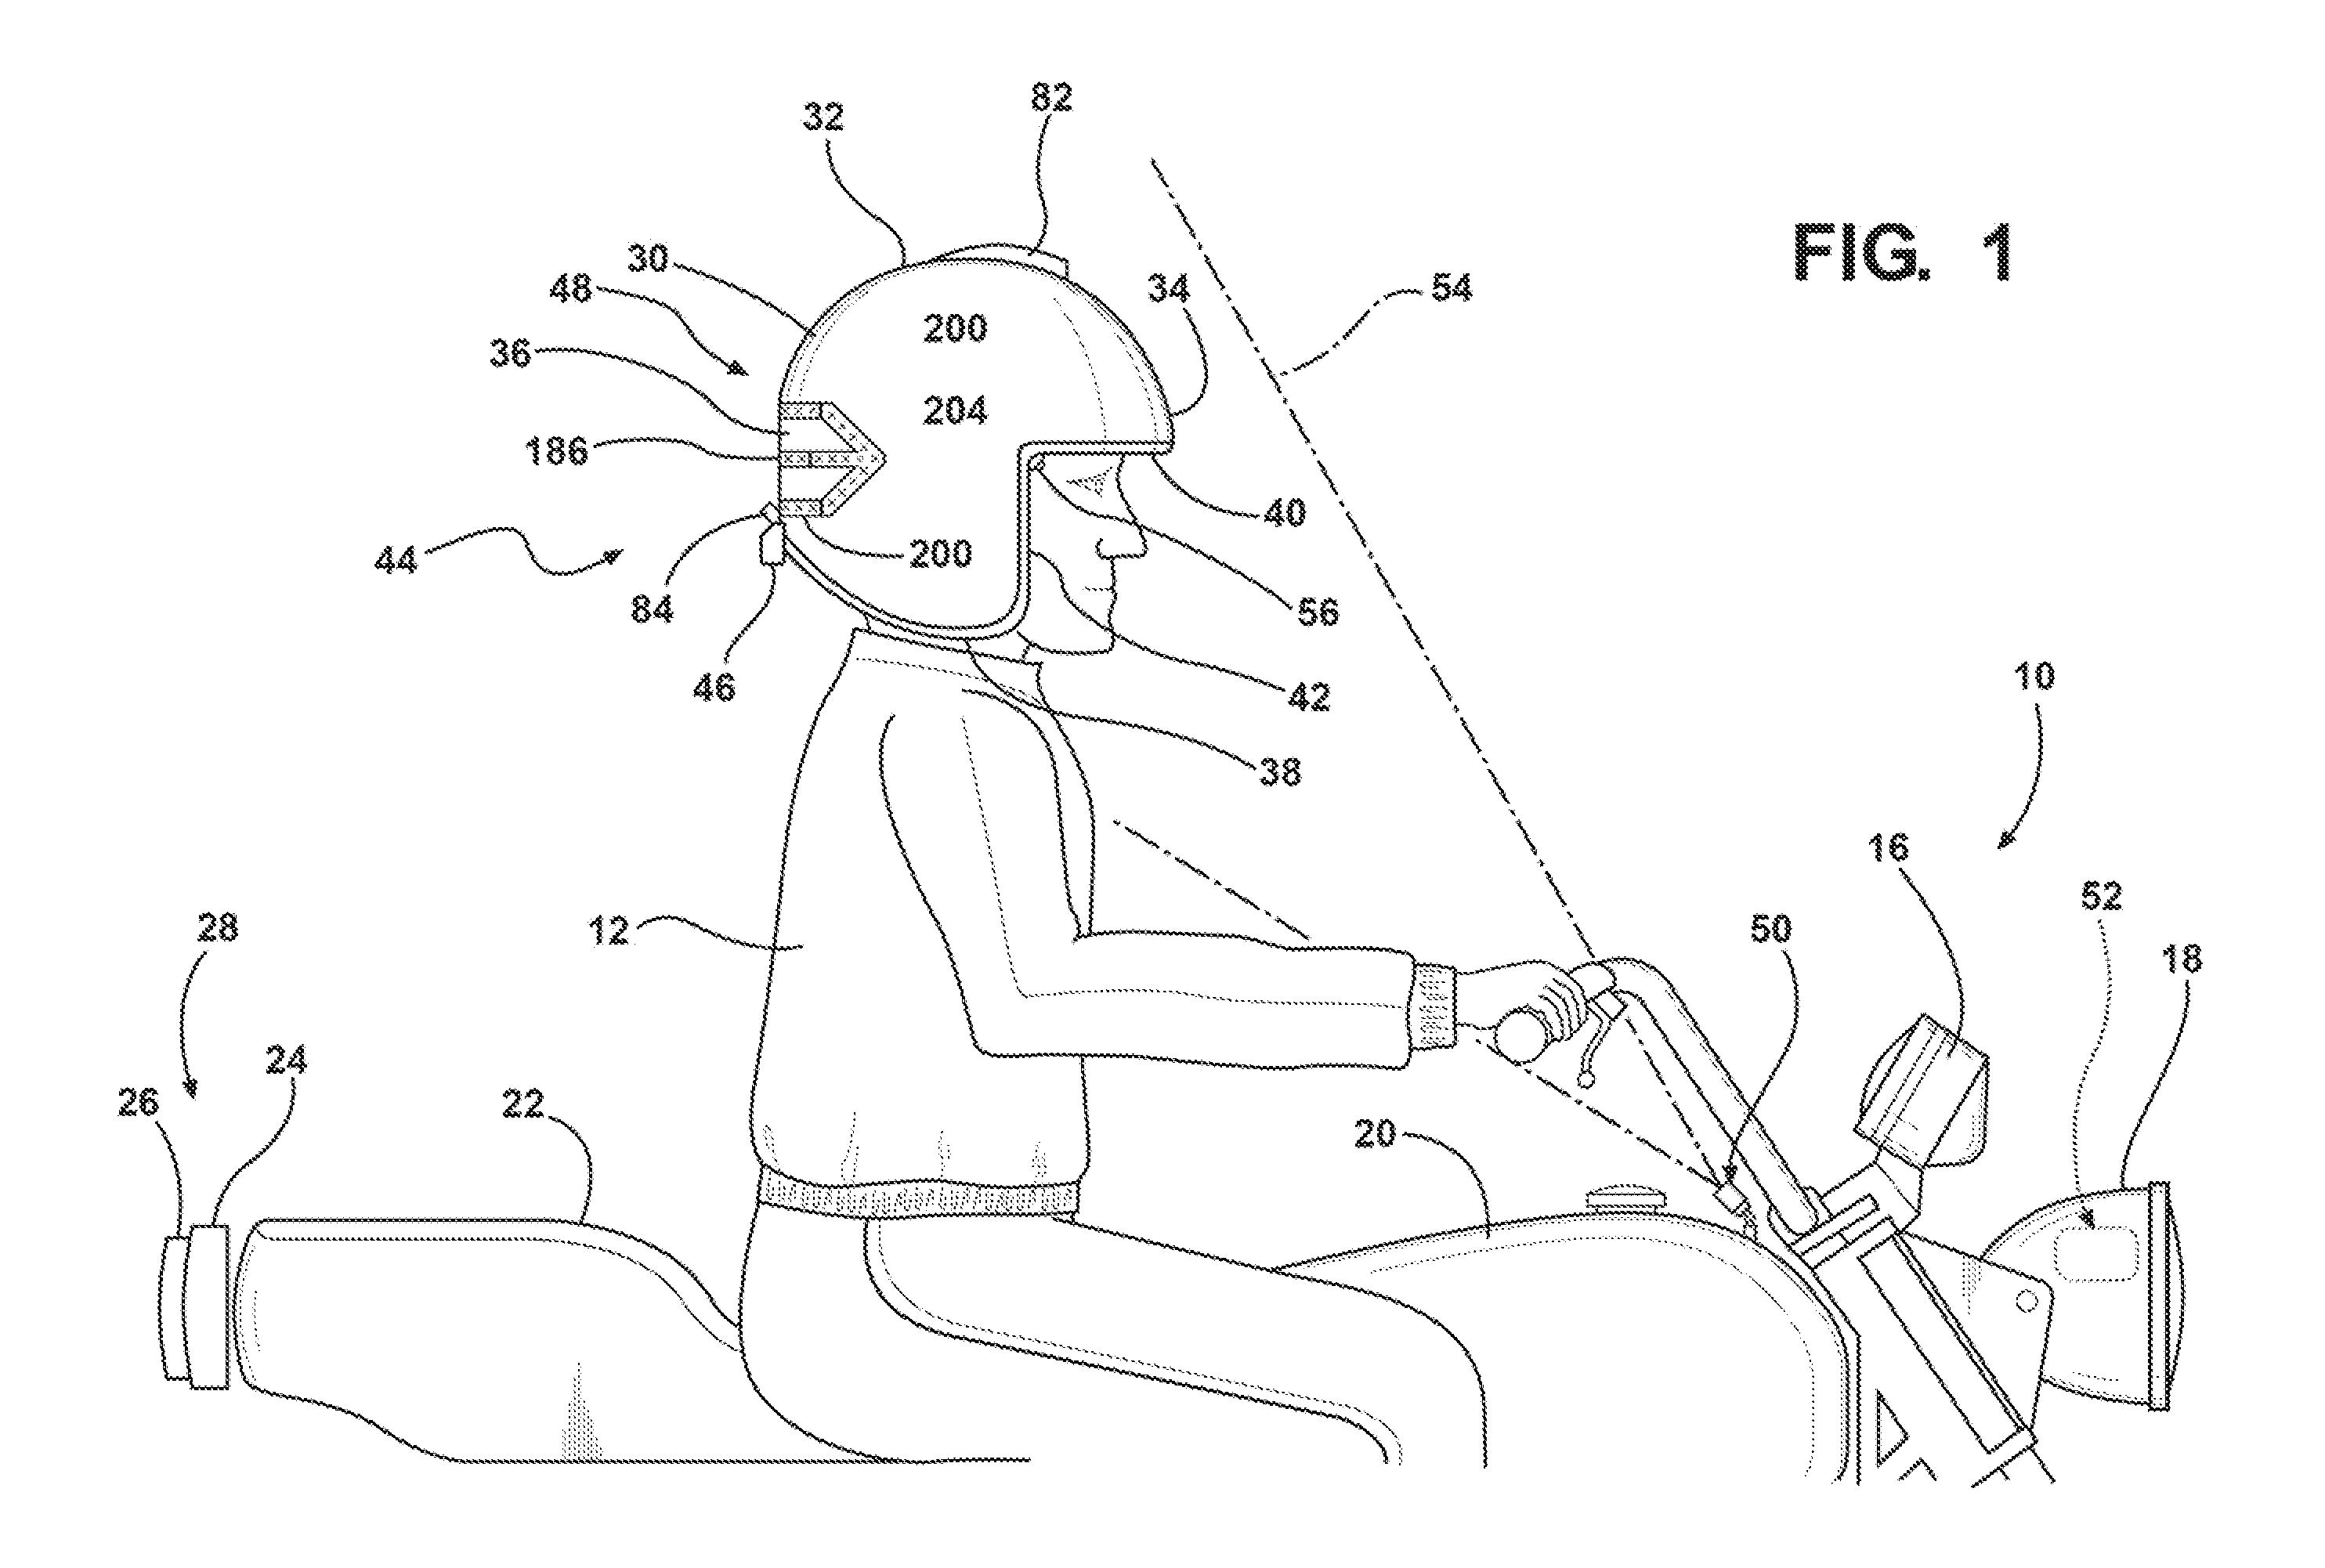 Communications assembly adapted for use with a helmet